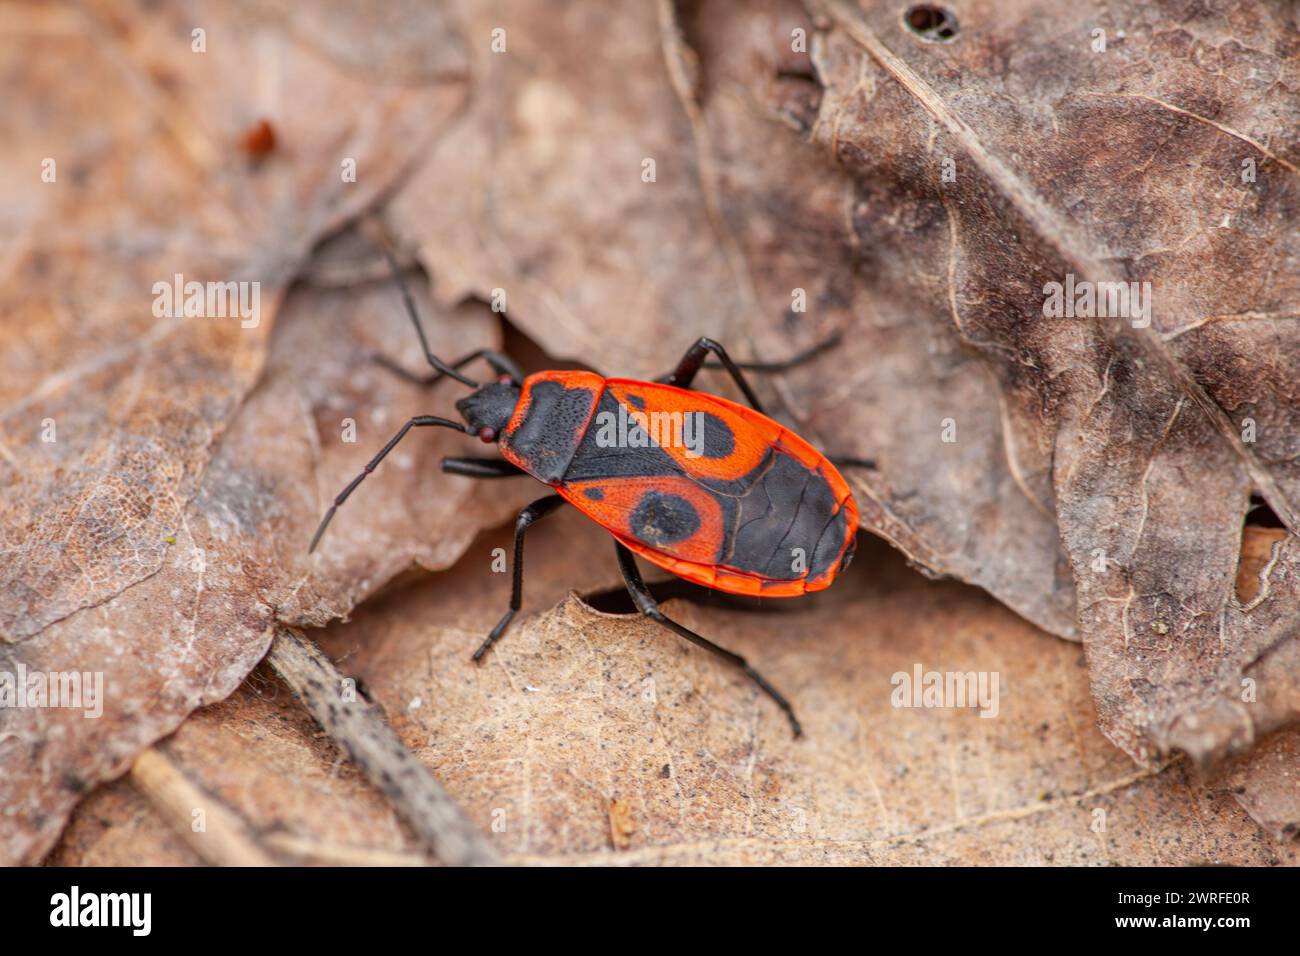 A red beetle, a type of insect and arthropod, is perched on a mound of leaves. It may belong to the family of shield bugs or scentless plant bugs Stock Photo